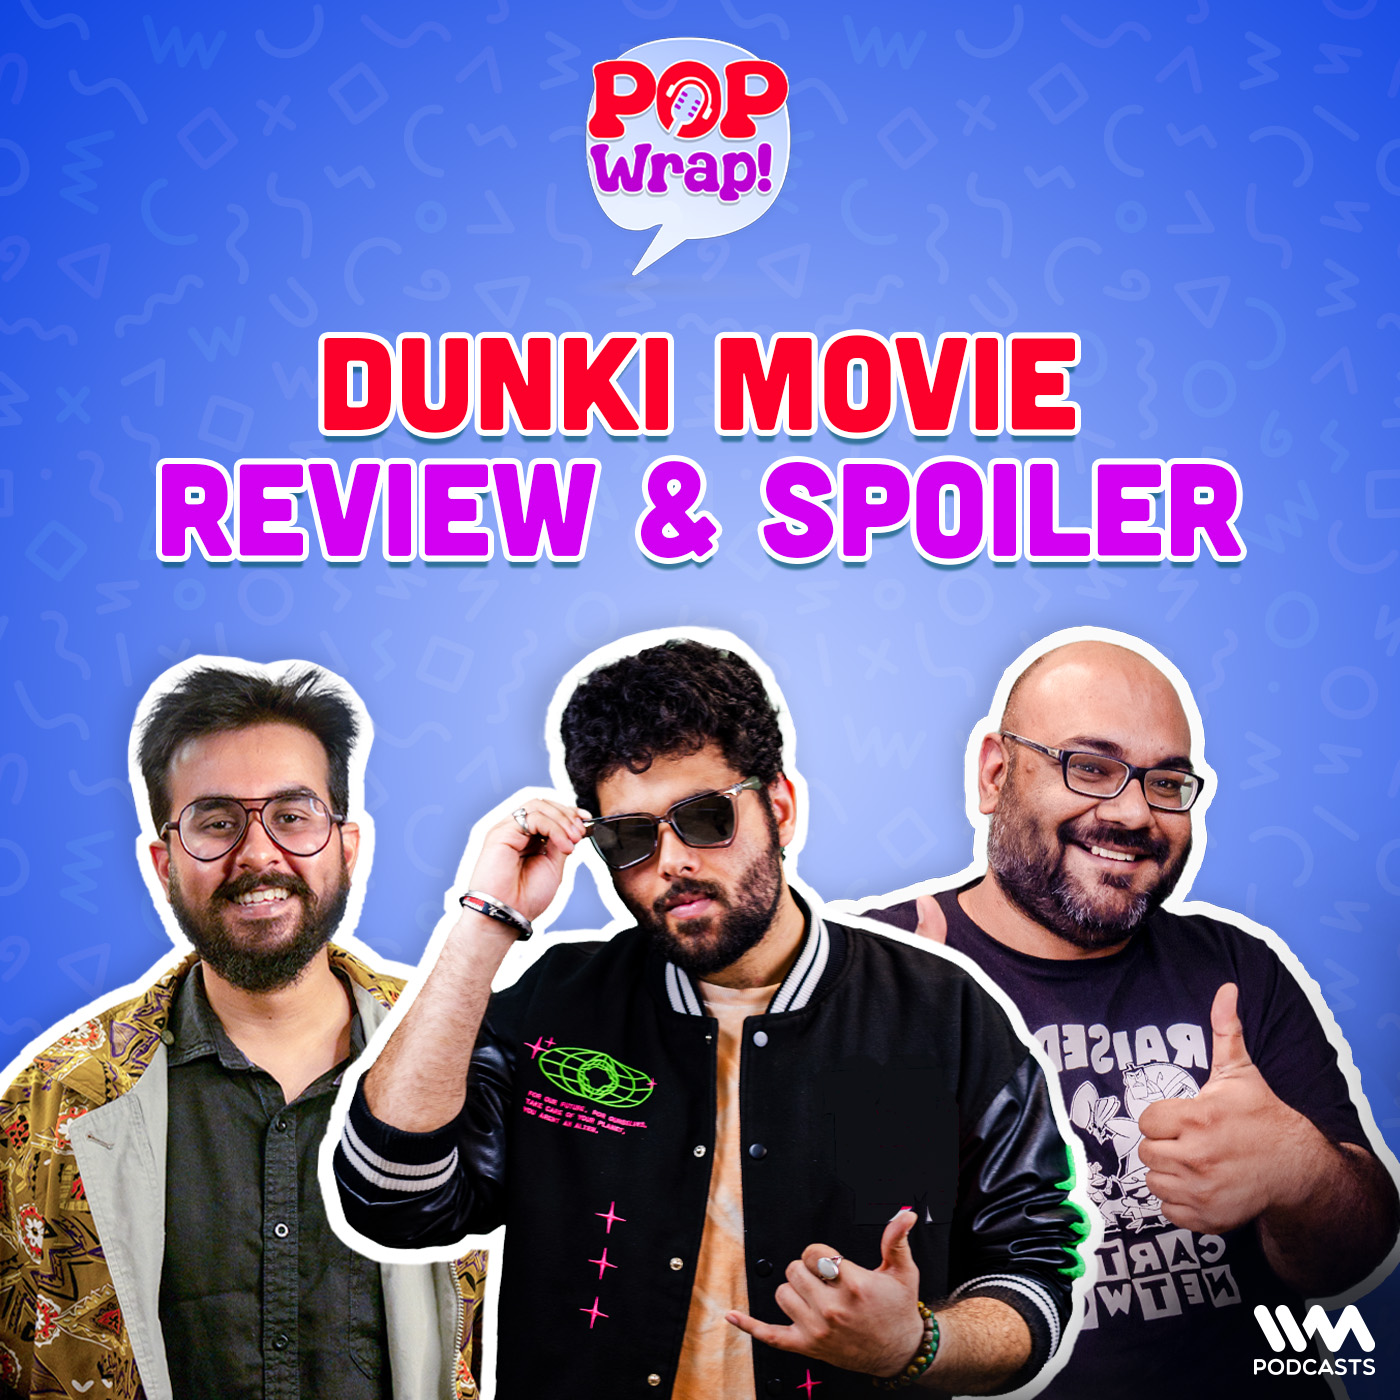 Dunki Movie Review & Spoilers